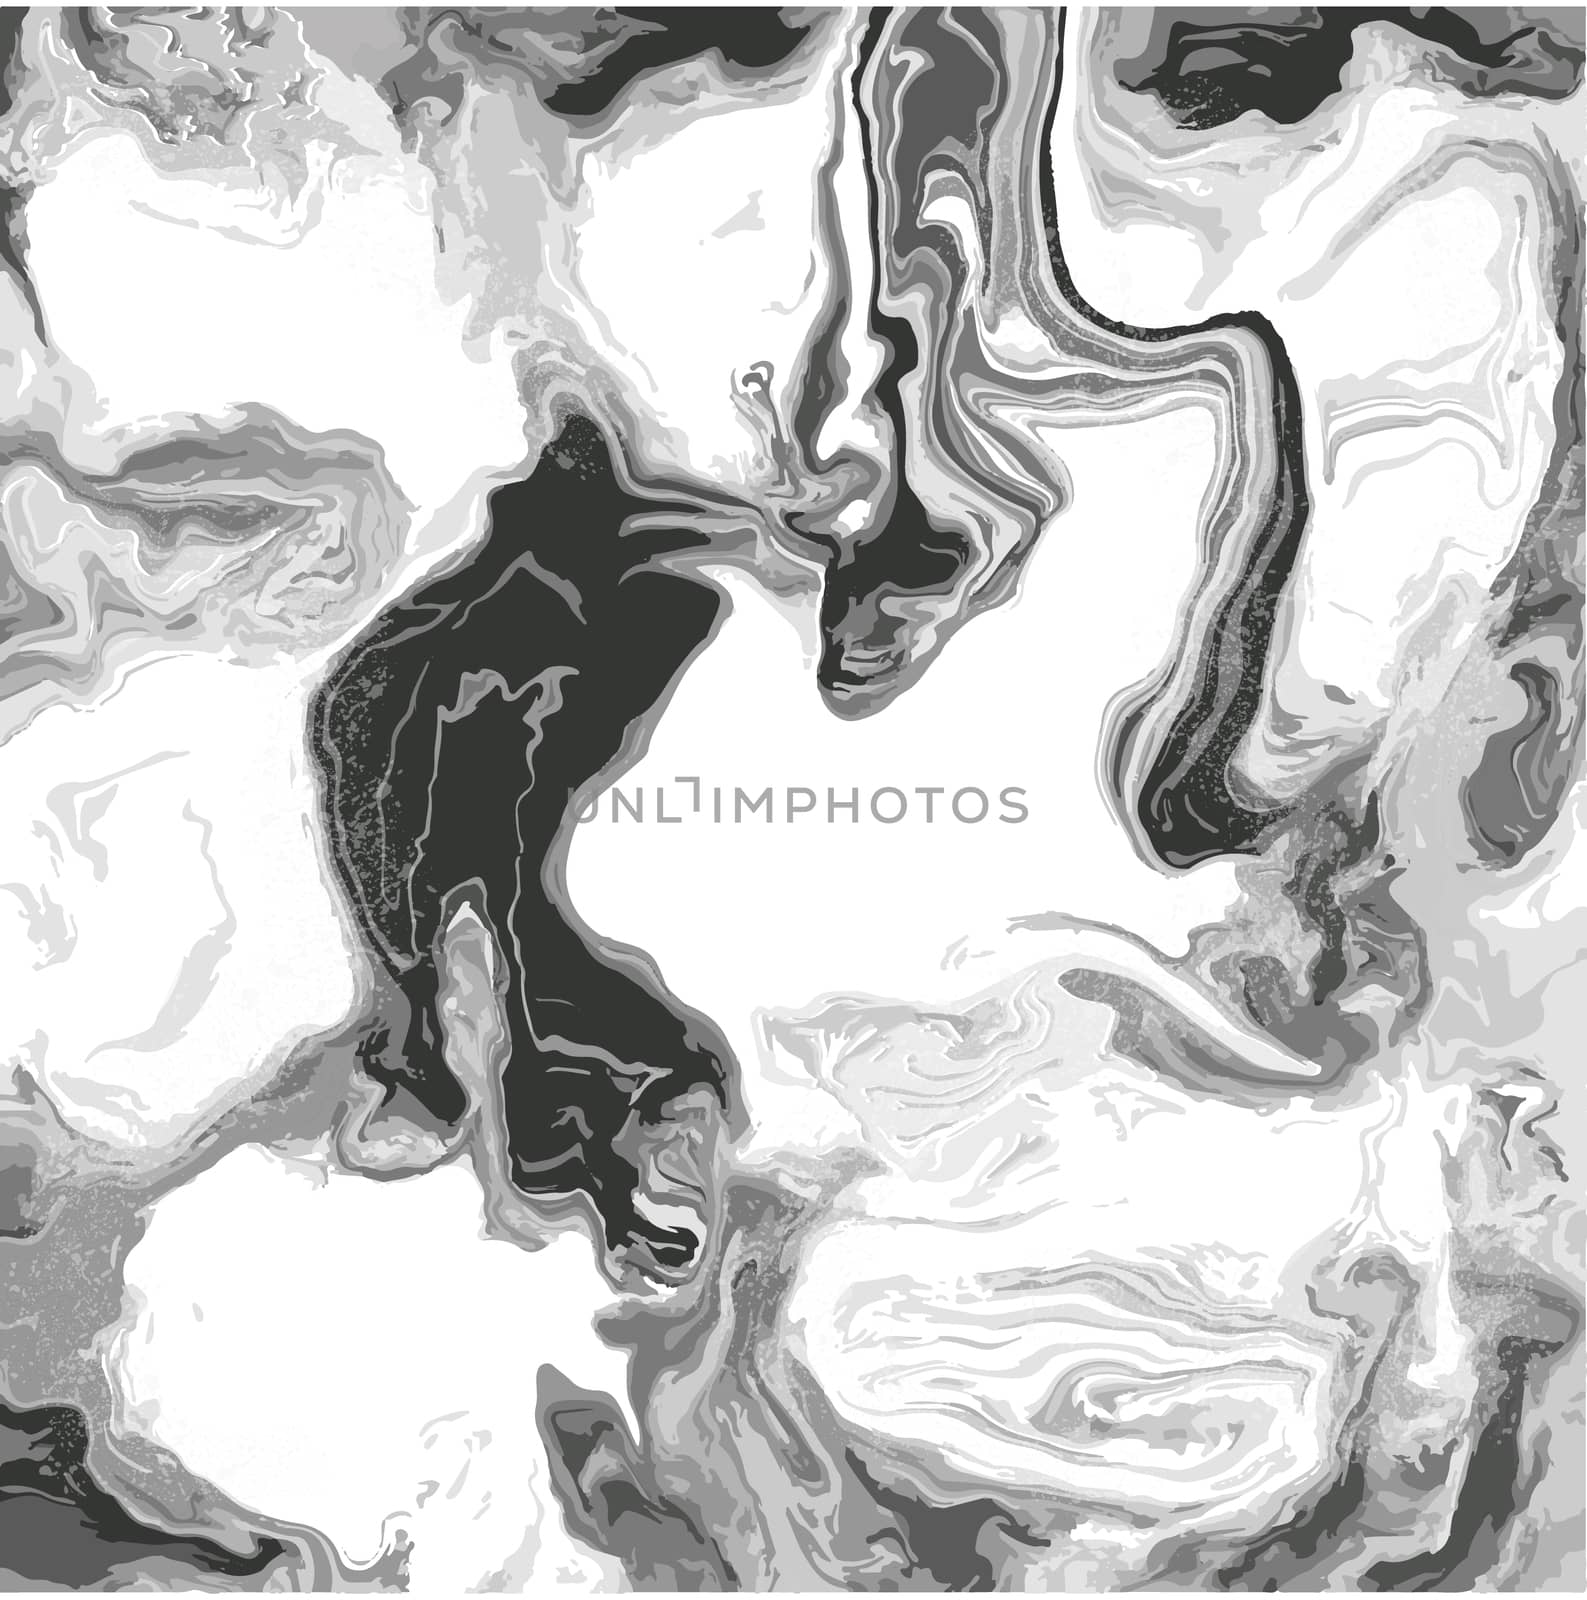 Black and white swirls of agate. Liquid swirls of marble texture. Fluid modern artwork. For wallpapers, banners, posters, cards, invitations, design covers, presentation, flyers. Vector illustration.